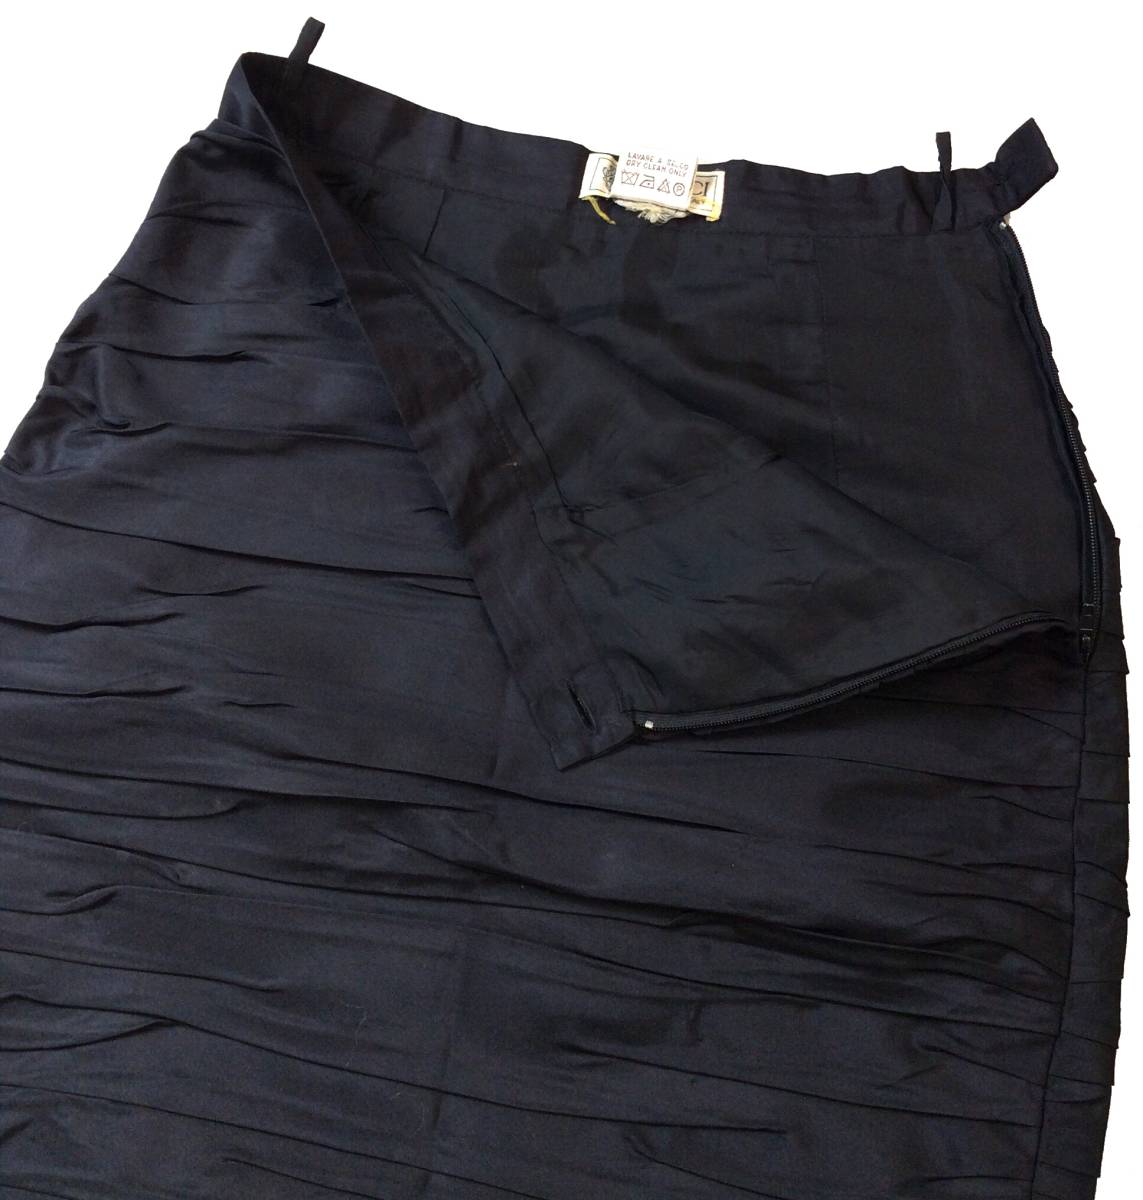 GUCCI Gucci ITALY made silk 100% design tight skirt black ITALY made lady's 38 postage 250 jpy (ma)